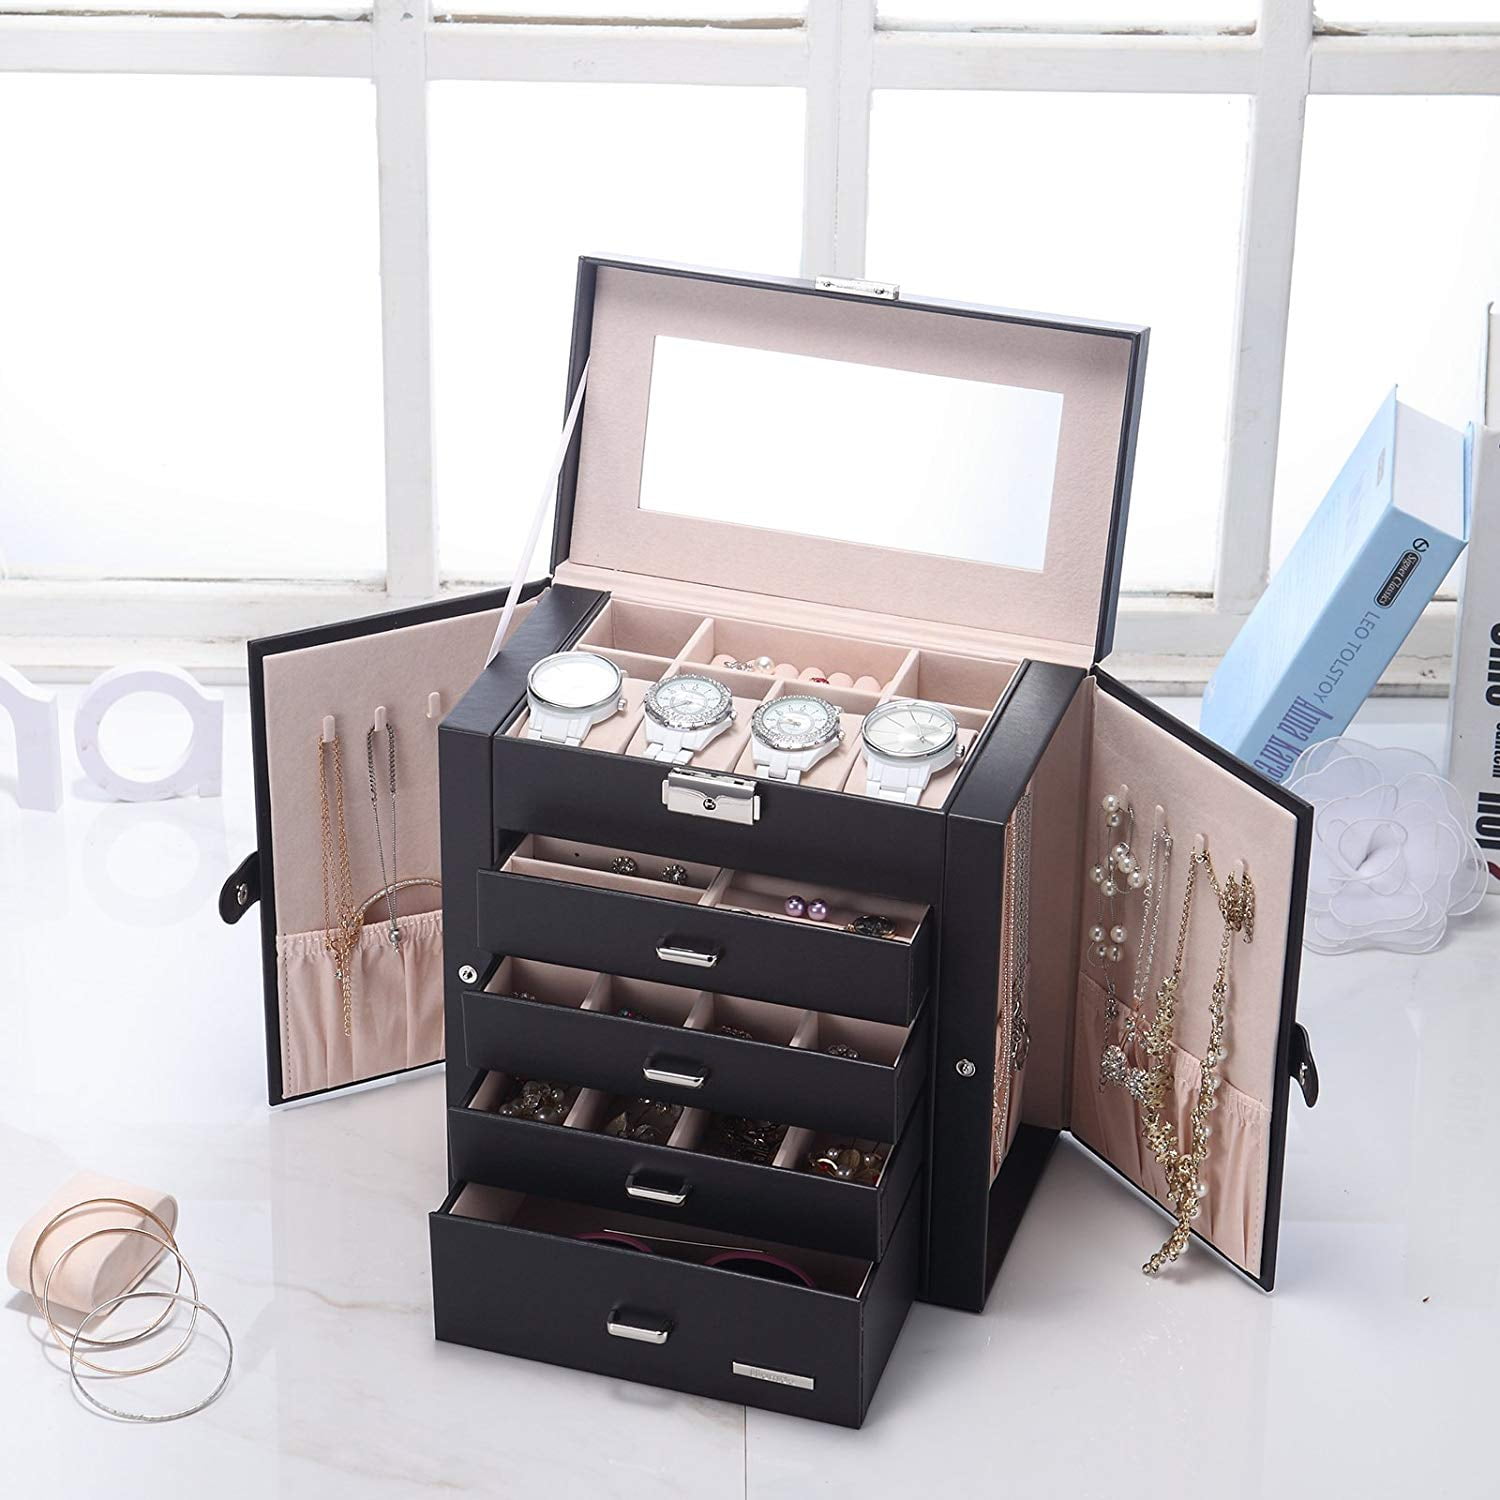 Details about   Jewelry Box Organizer Large PU Leather Drawer Earring Ring Necklace Storage Case 